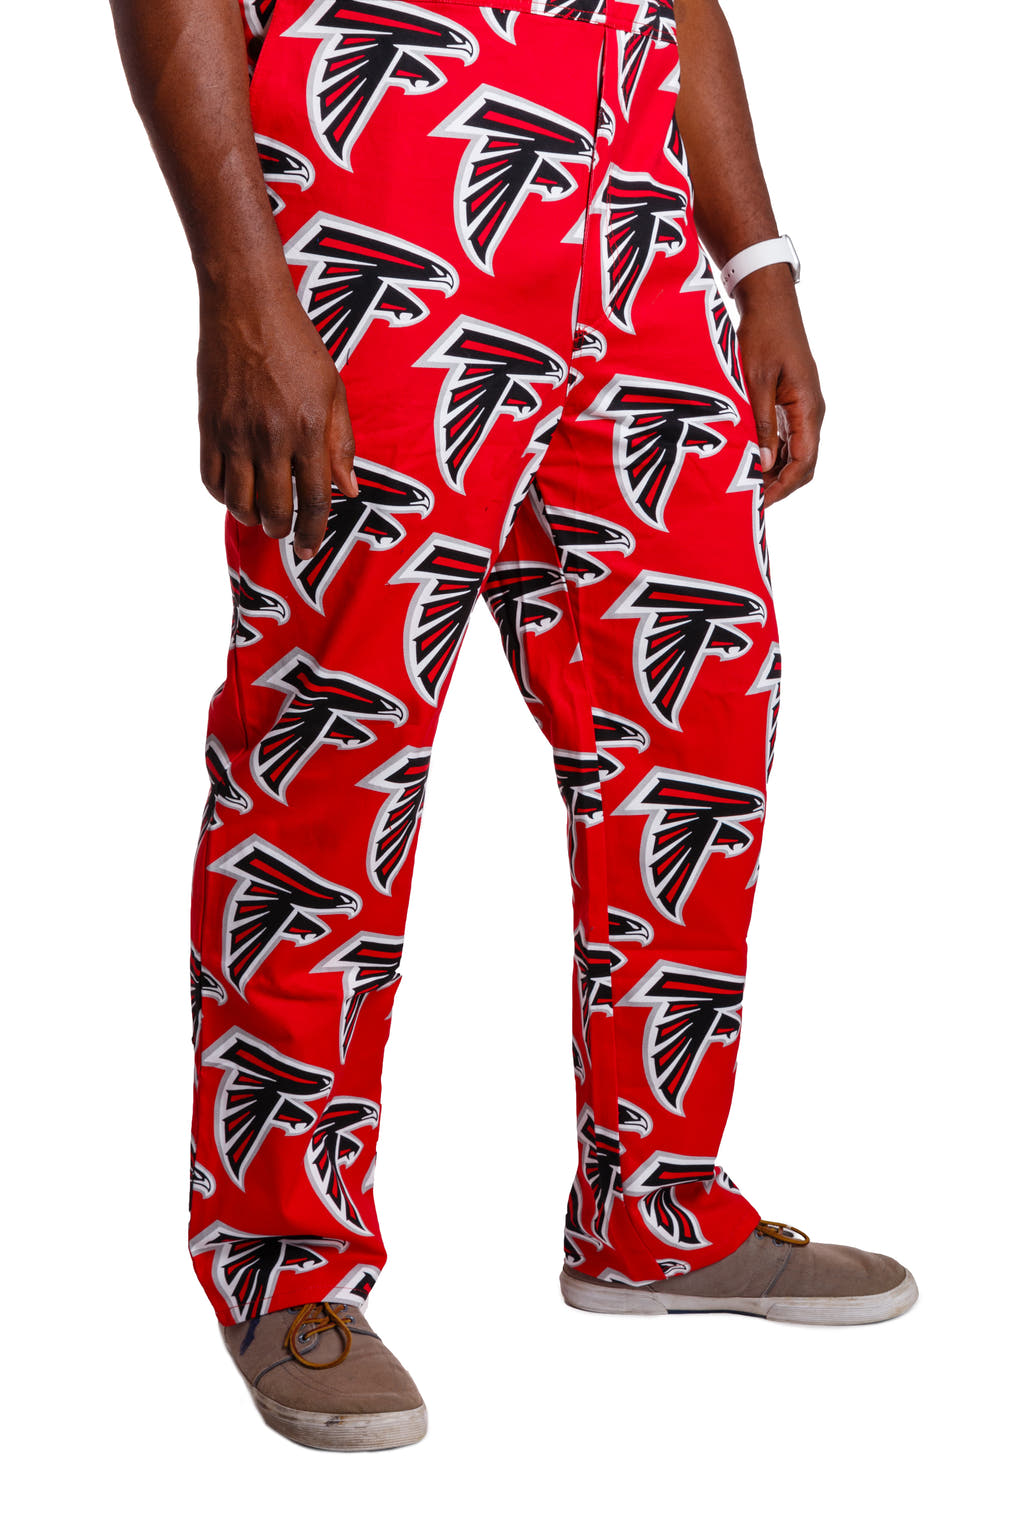 Falcons red unisex overalls